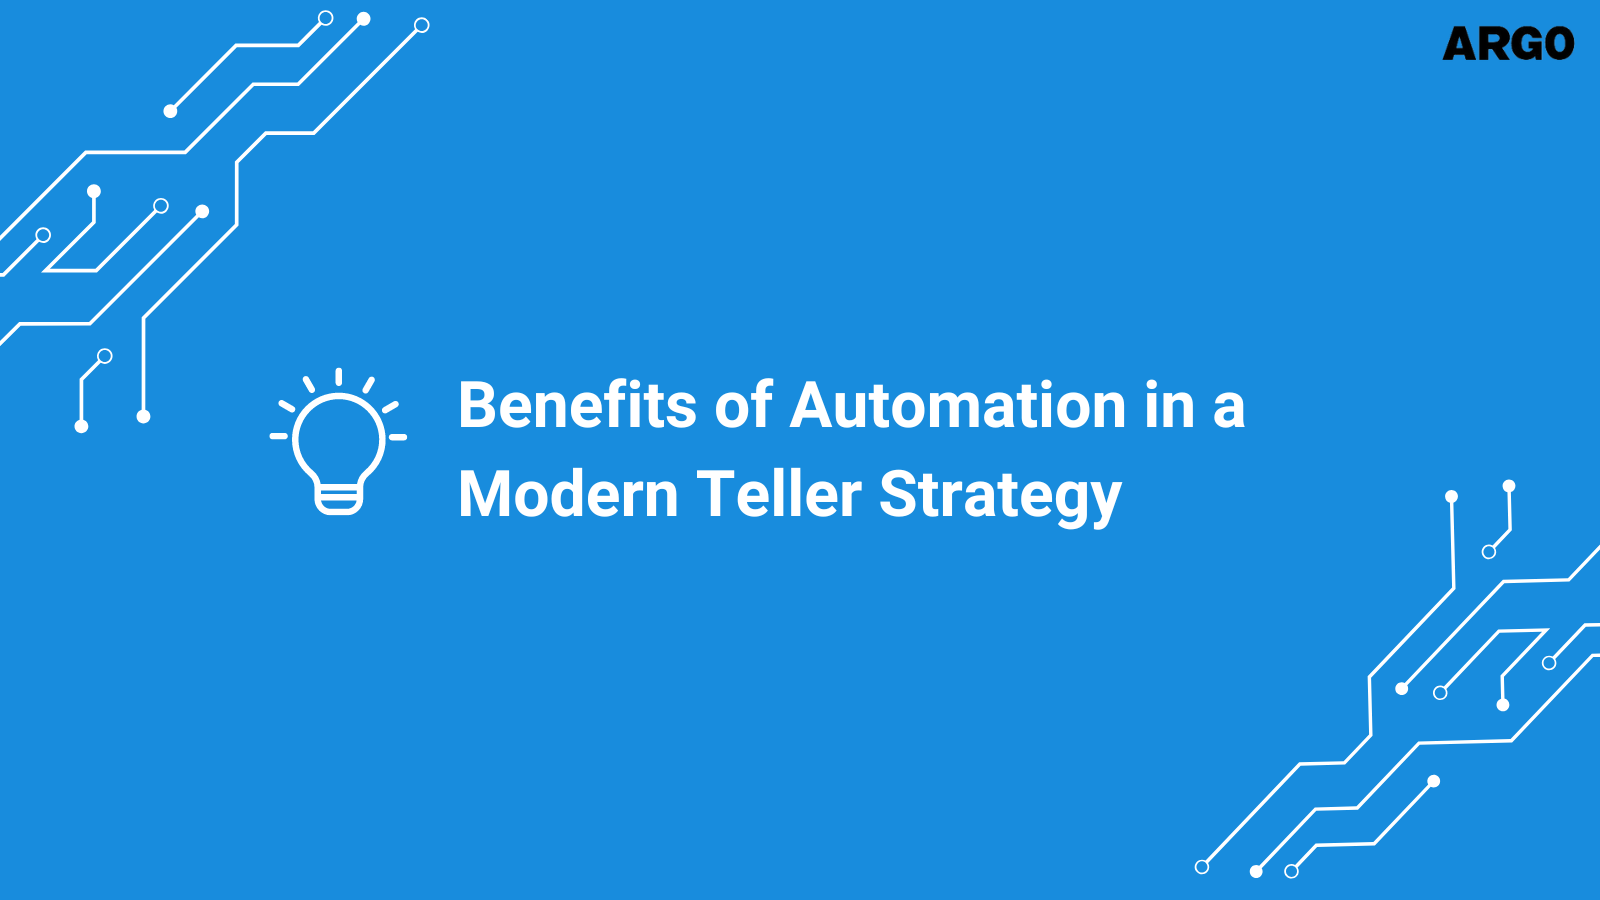 Benefits of Automation in a Modern Teller Strategy